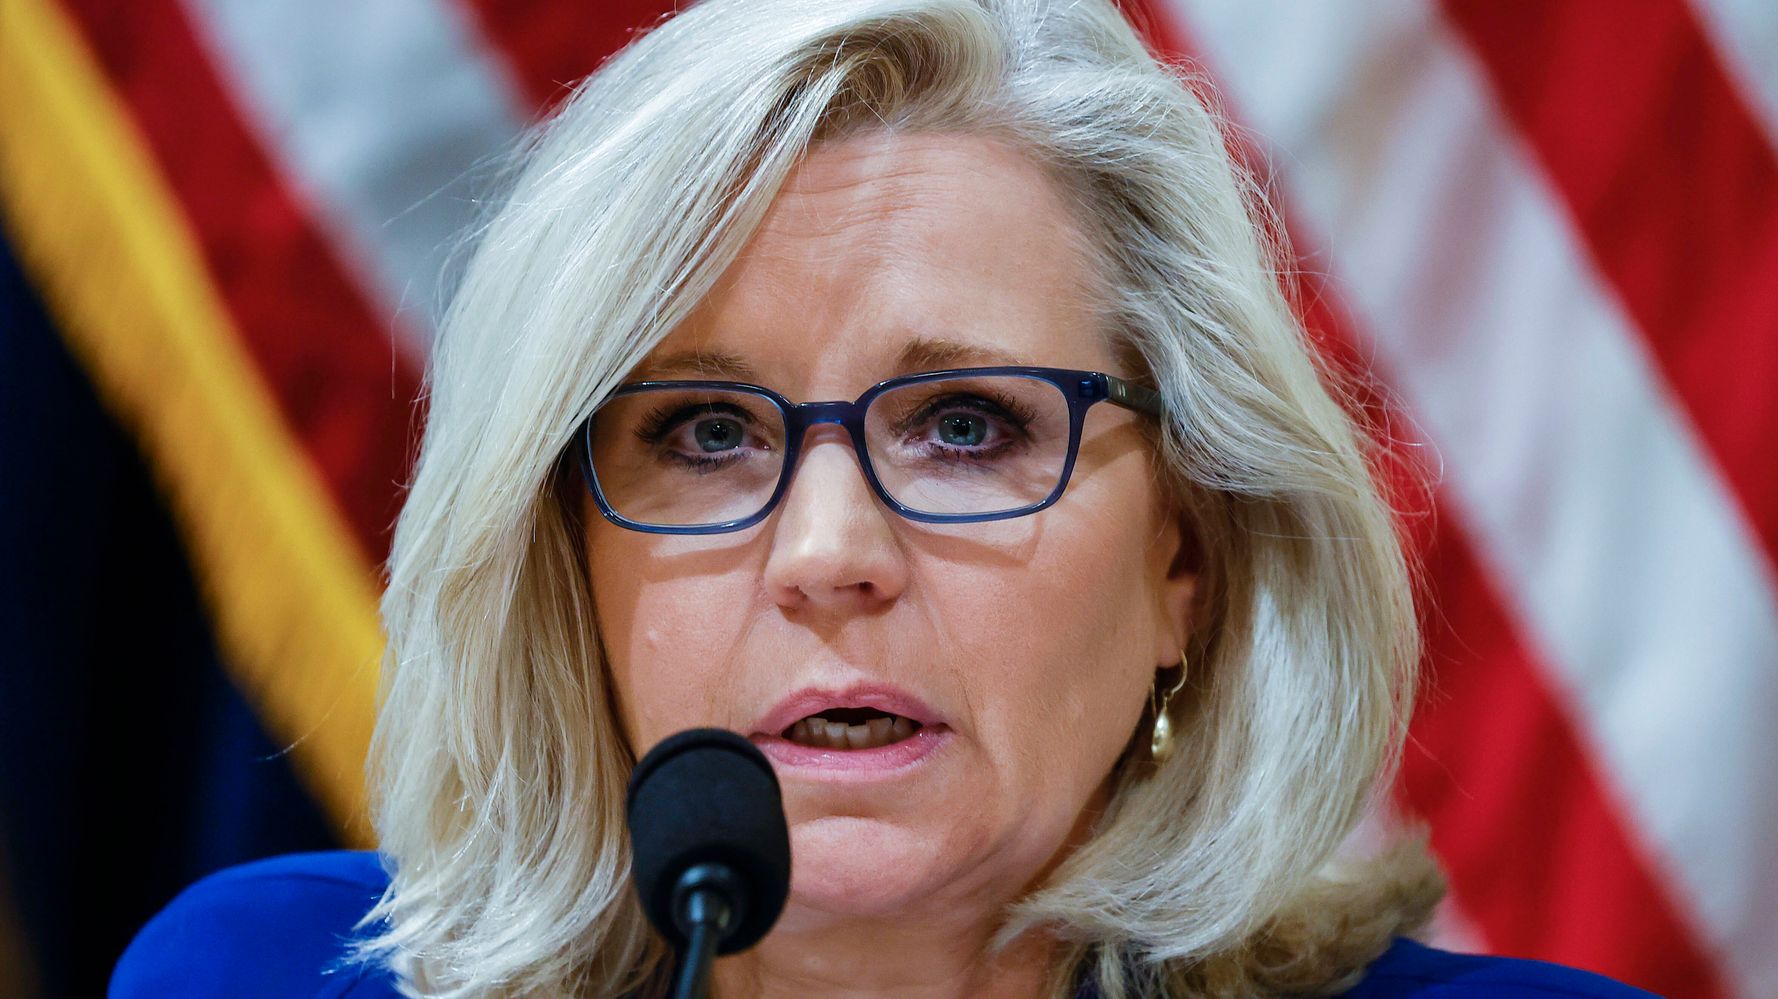 Liz Cheney: 'I Was Wrong' In Opposing Gay Marriage In Past